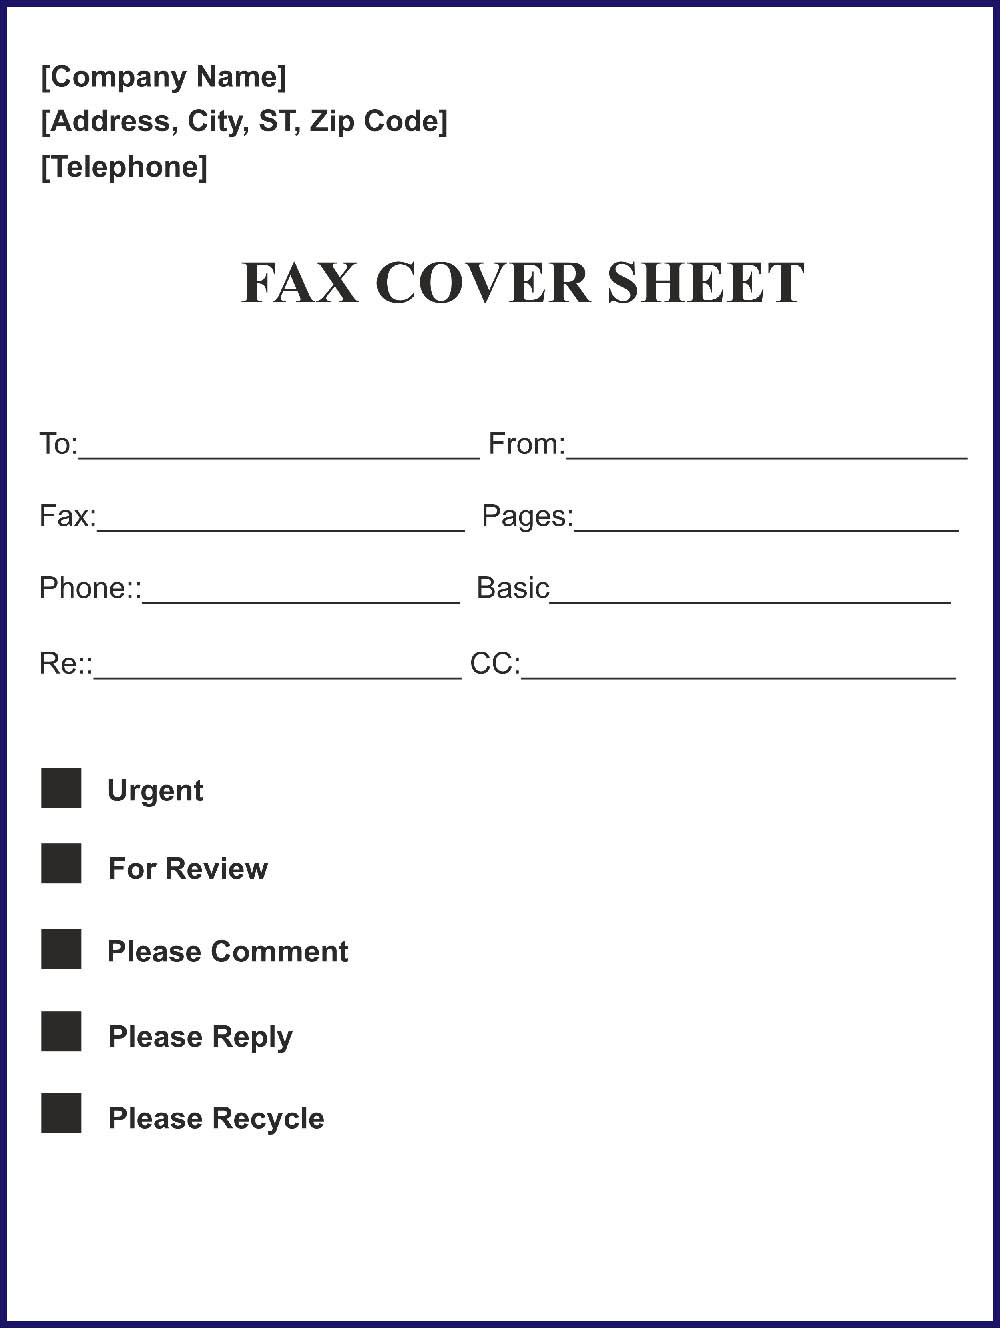 Fax Cover Sheet Template for Resume Free Printable Professional Fax Cover Sheet Template